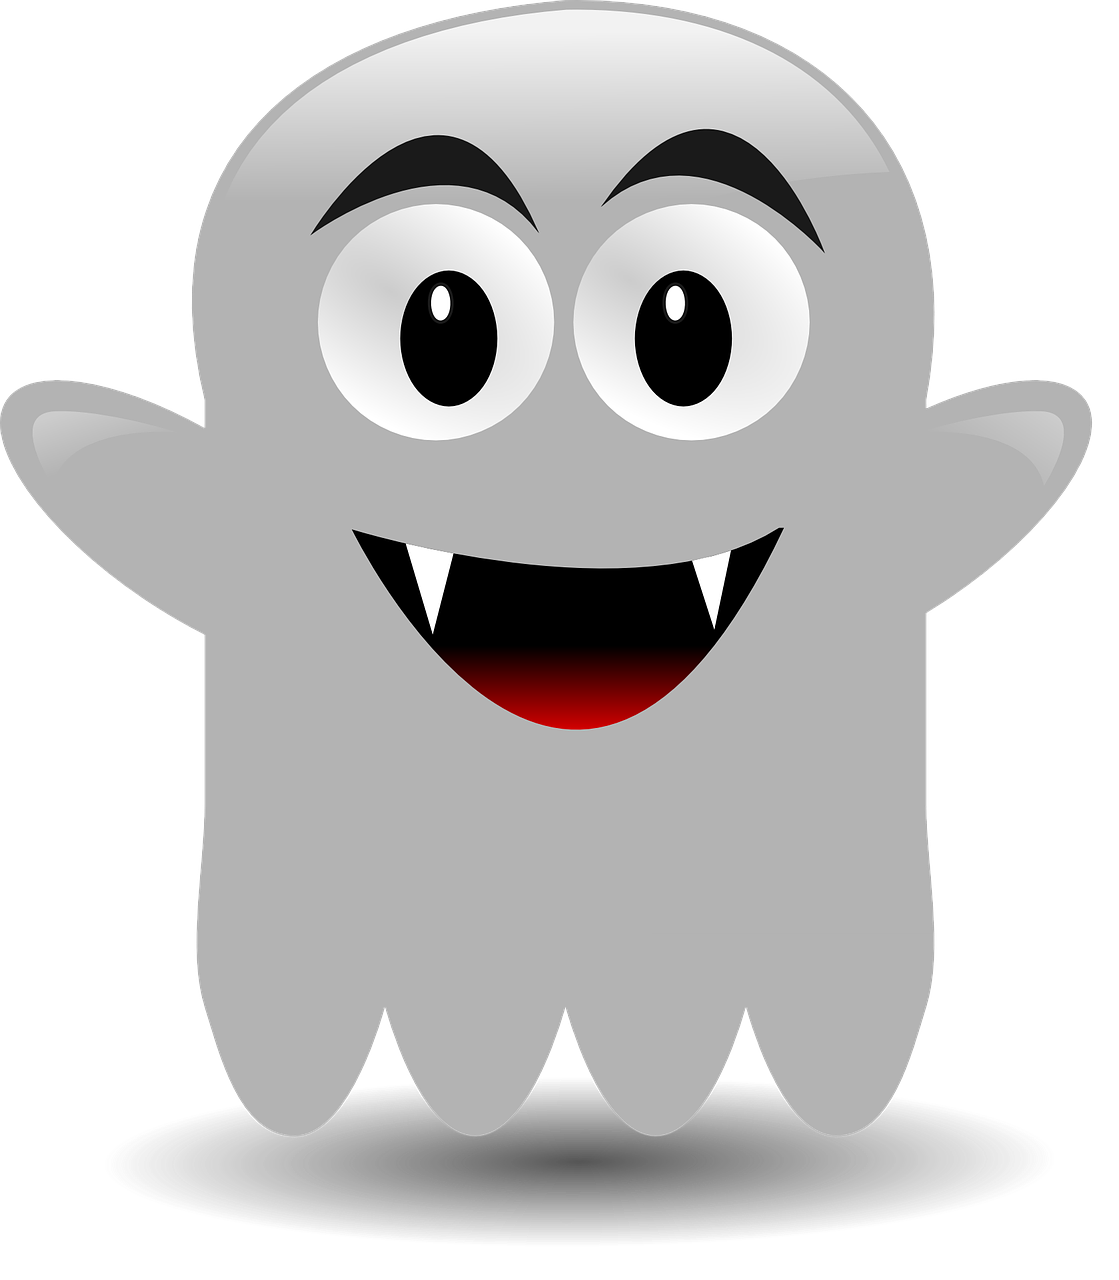 Scary Face Clip Art at  - vector clip art online, royalty free &  public domain